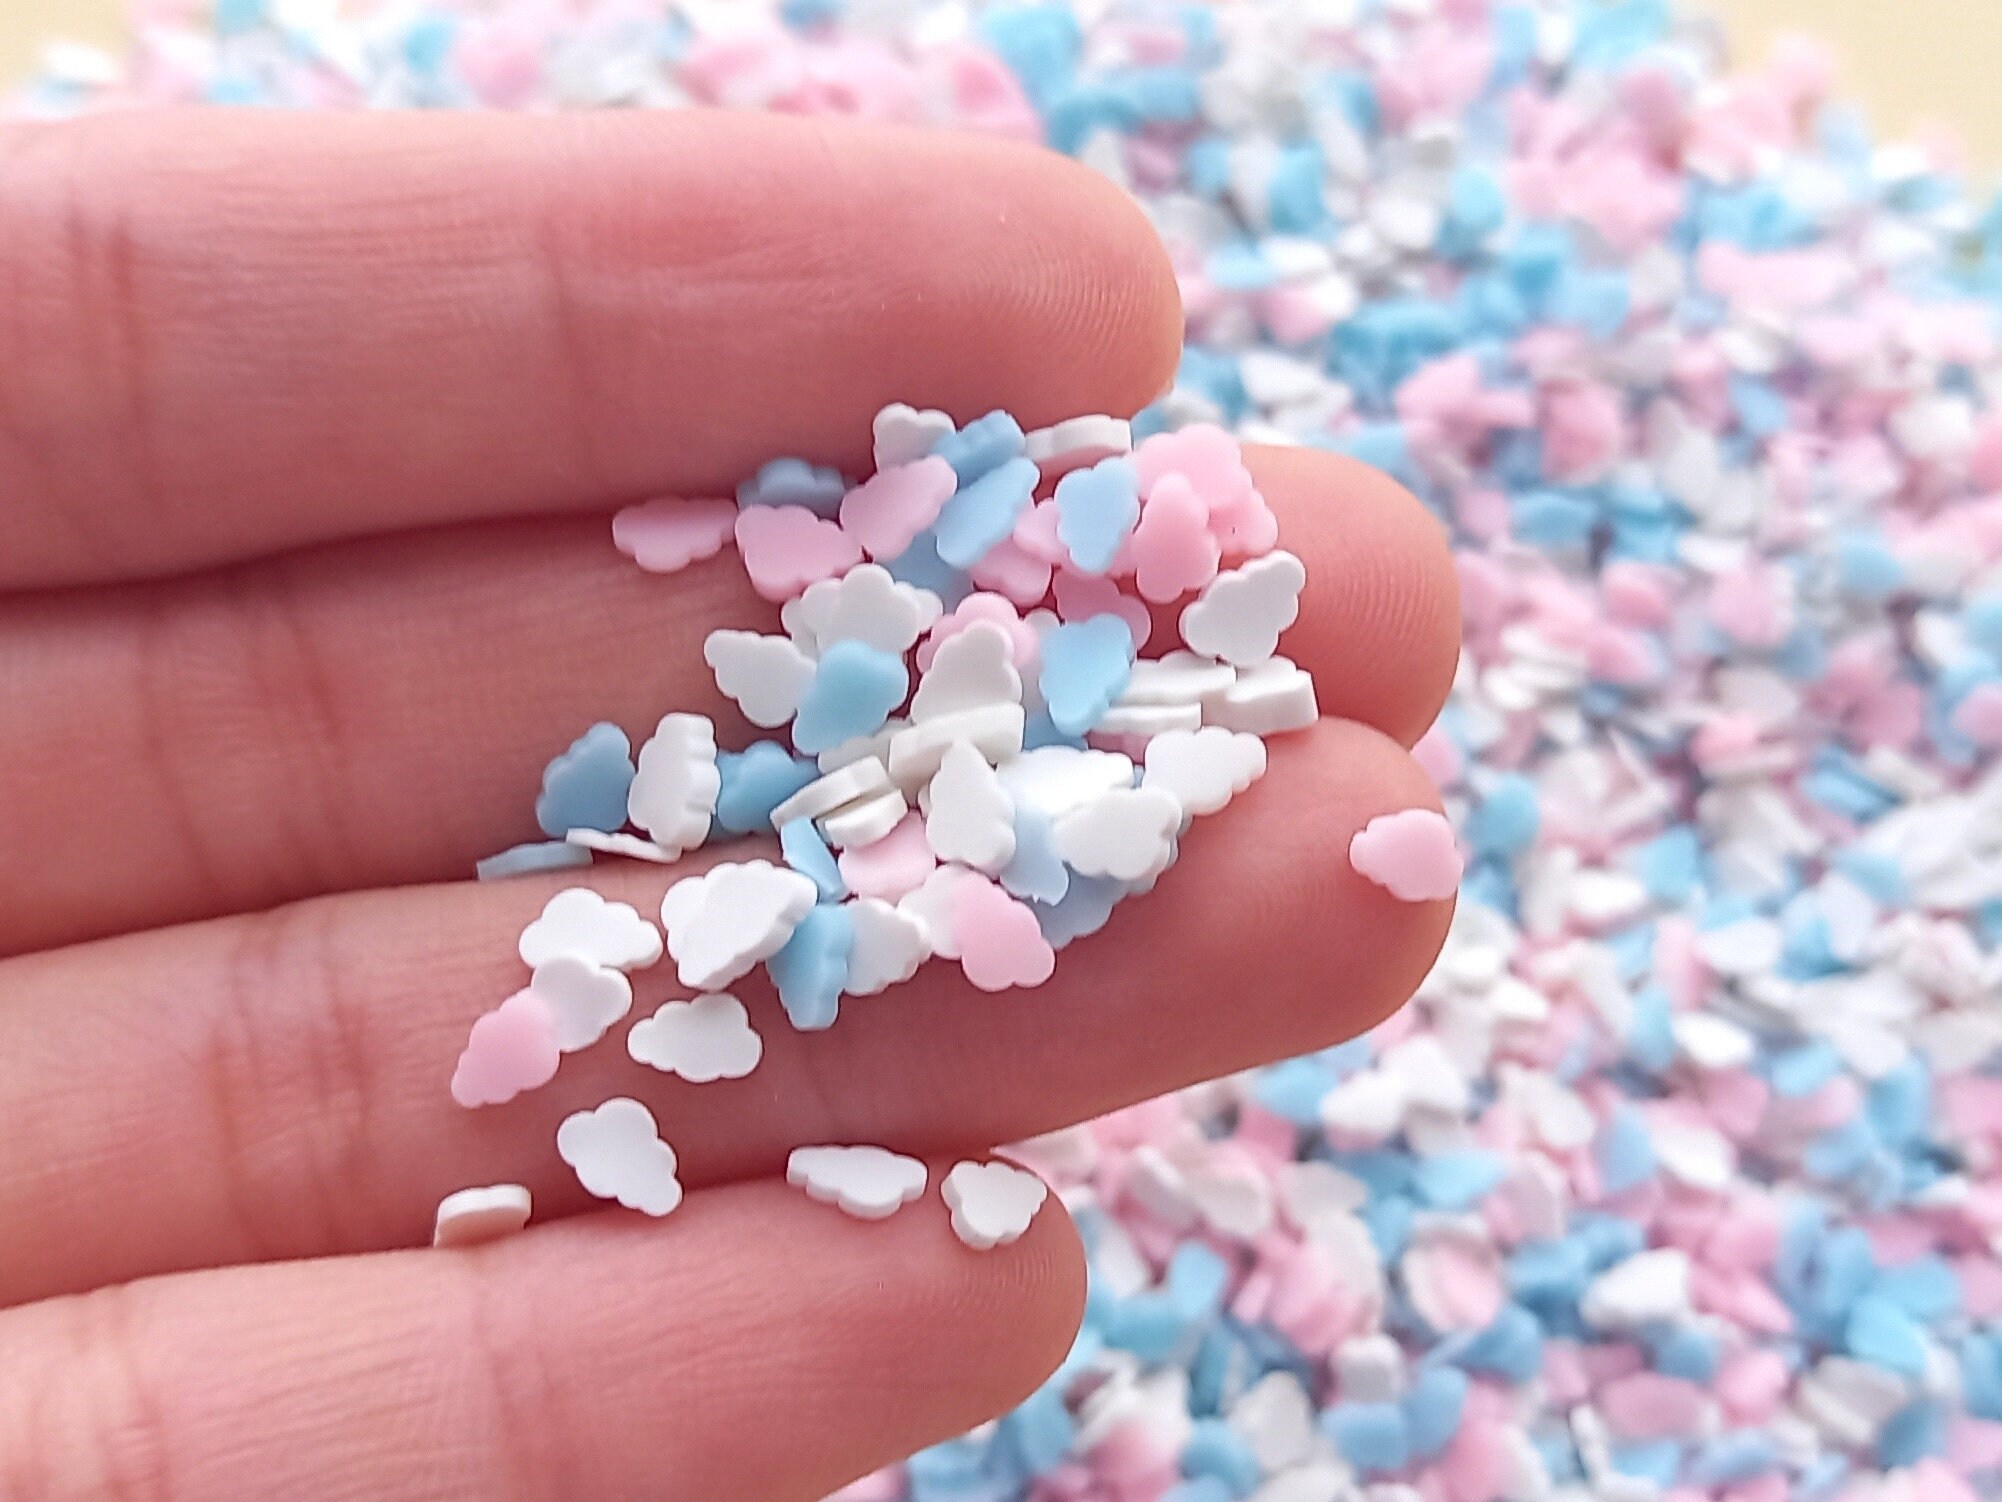 Cloud Pastel Colors Fimo Fake Polymer Clay Sprinkles Jimmies Funfetti